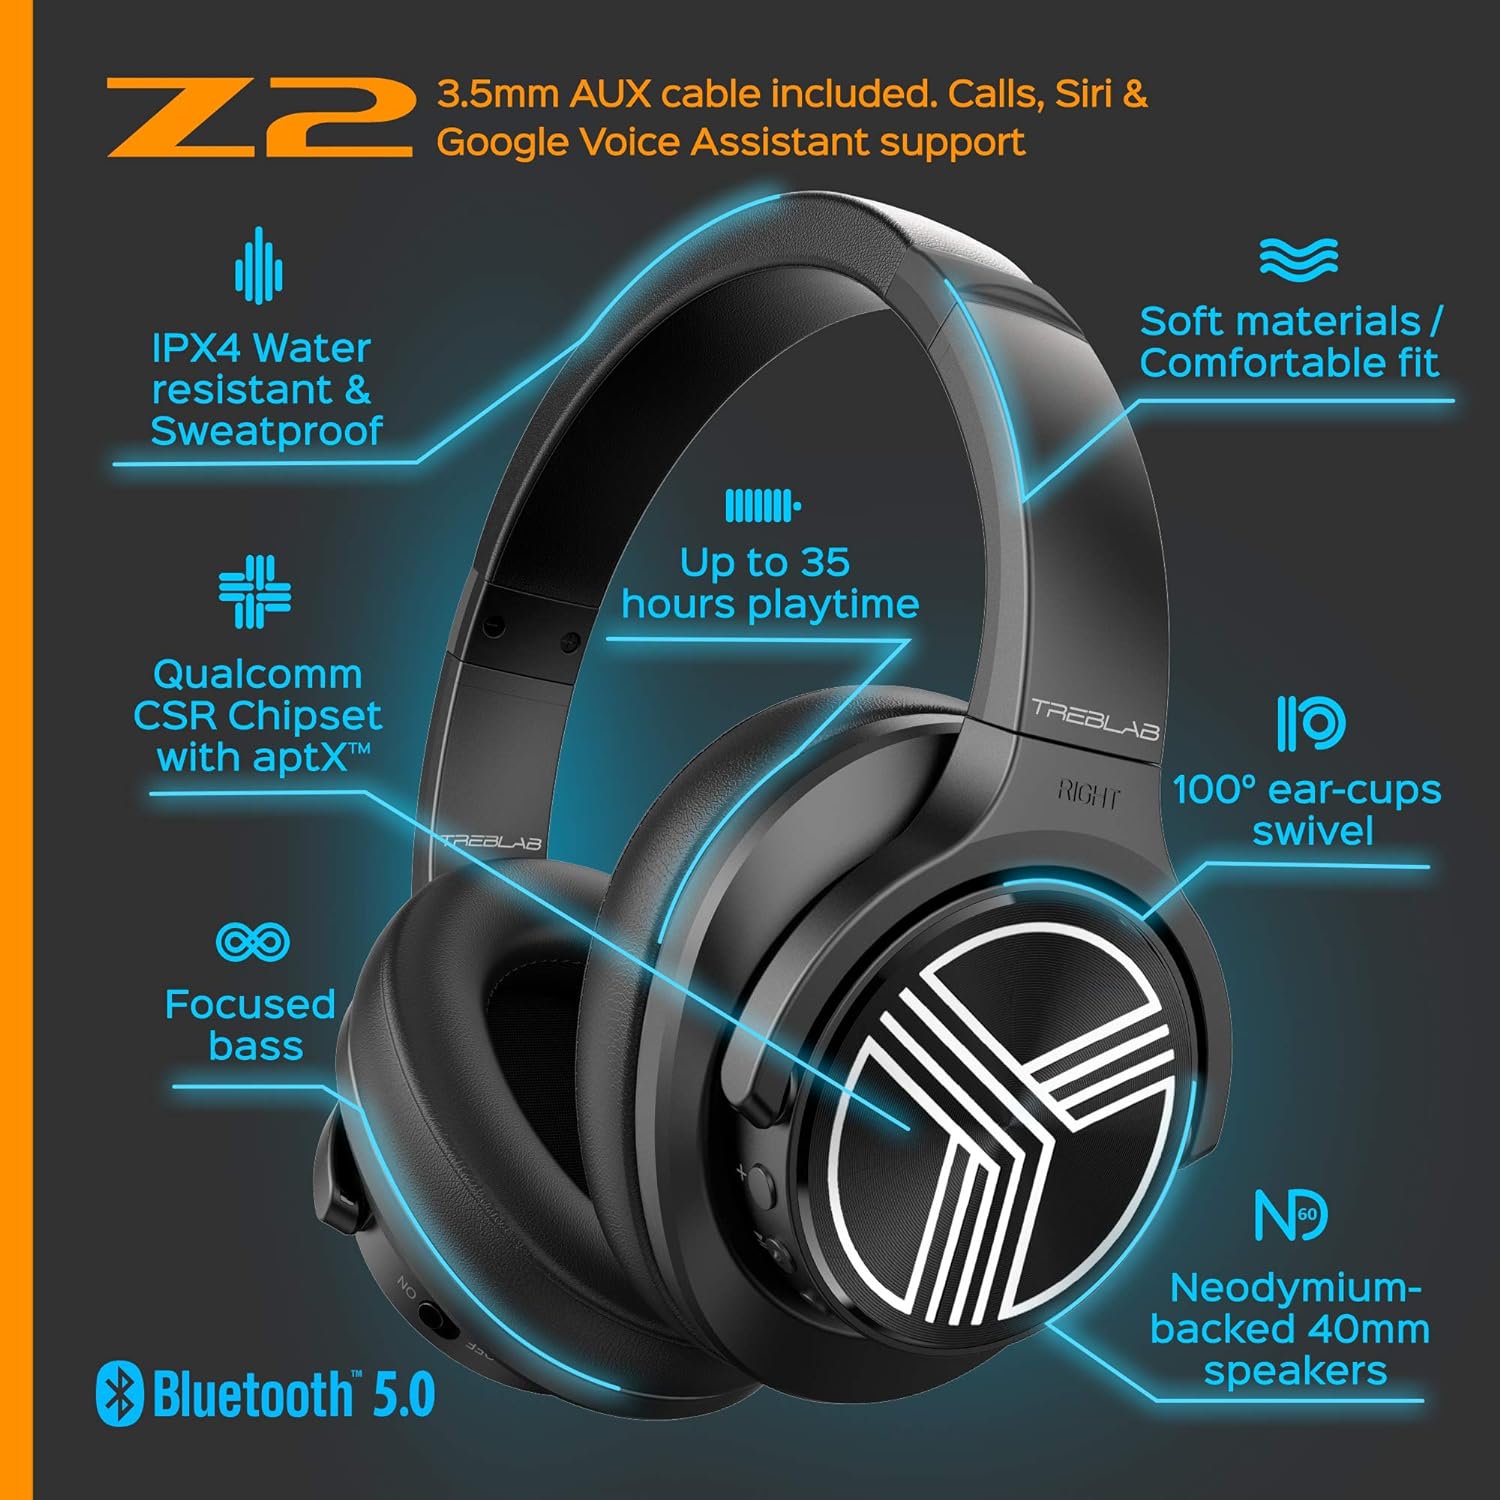 TREBLAB Z2 - Premium Sports Wireless Headphones - Active Noise Cancelling T-Quiet ANC, Bluetooth aptX Ultra-HD Sound, Over Ear Neodymium Speakers, 35H Playtime, Microphone, Best For Gym Workout Travel